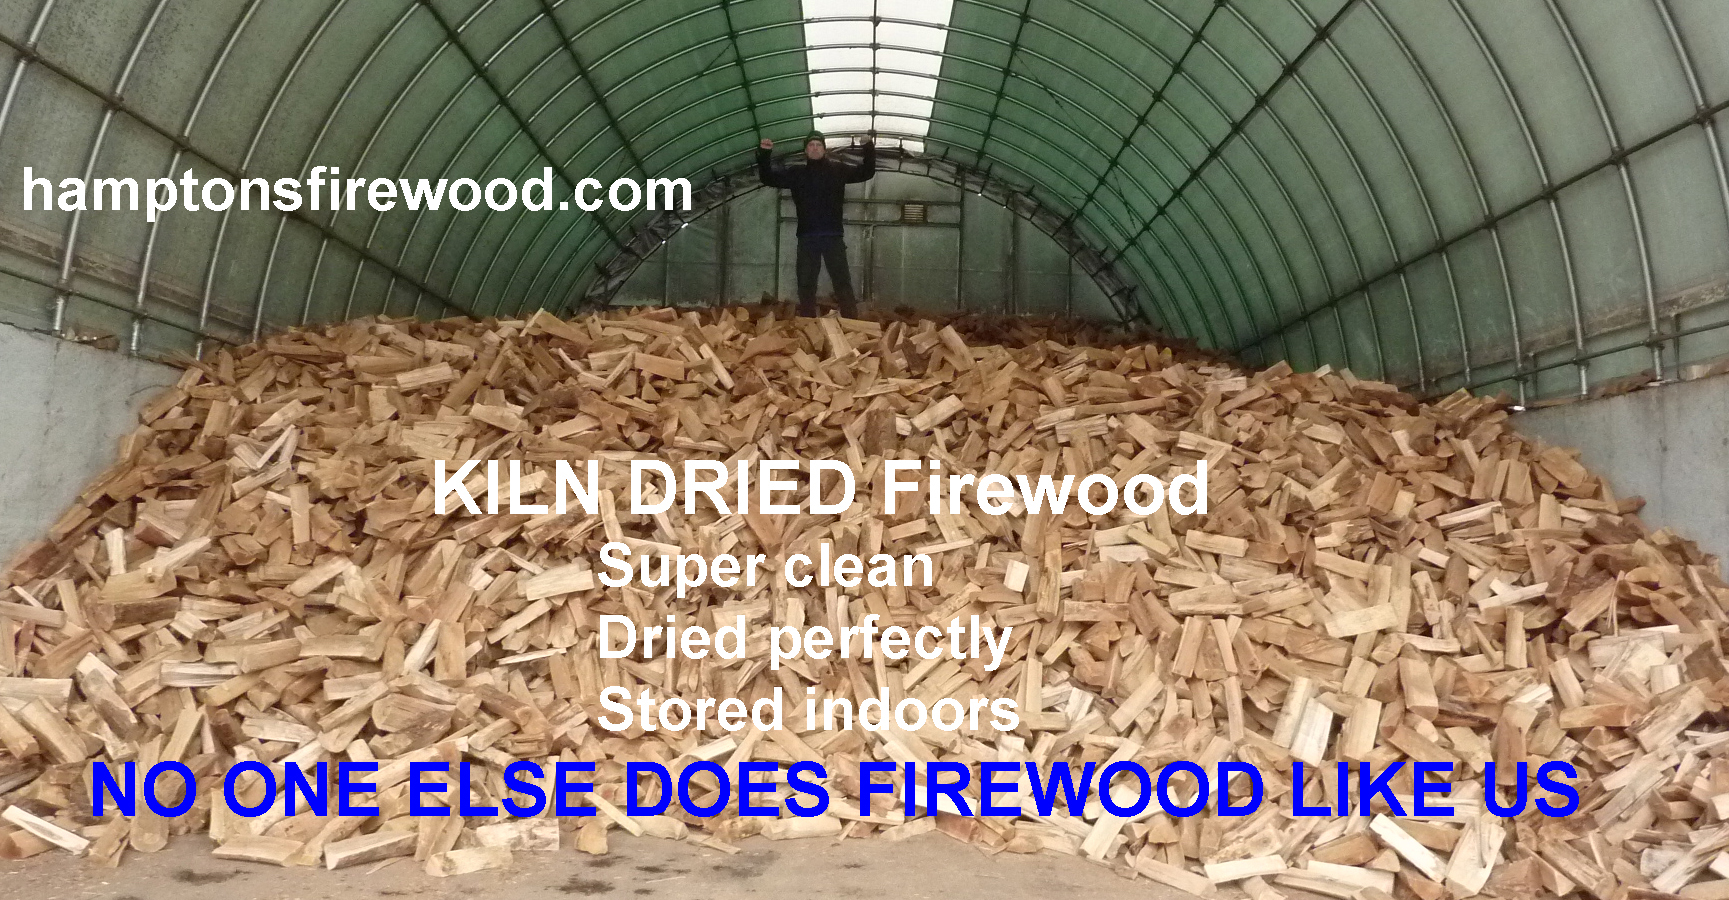 We are firewood experts